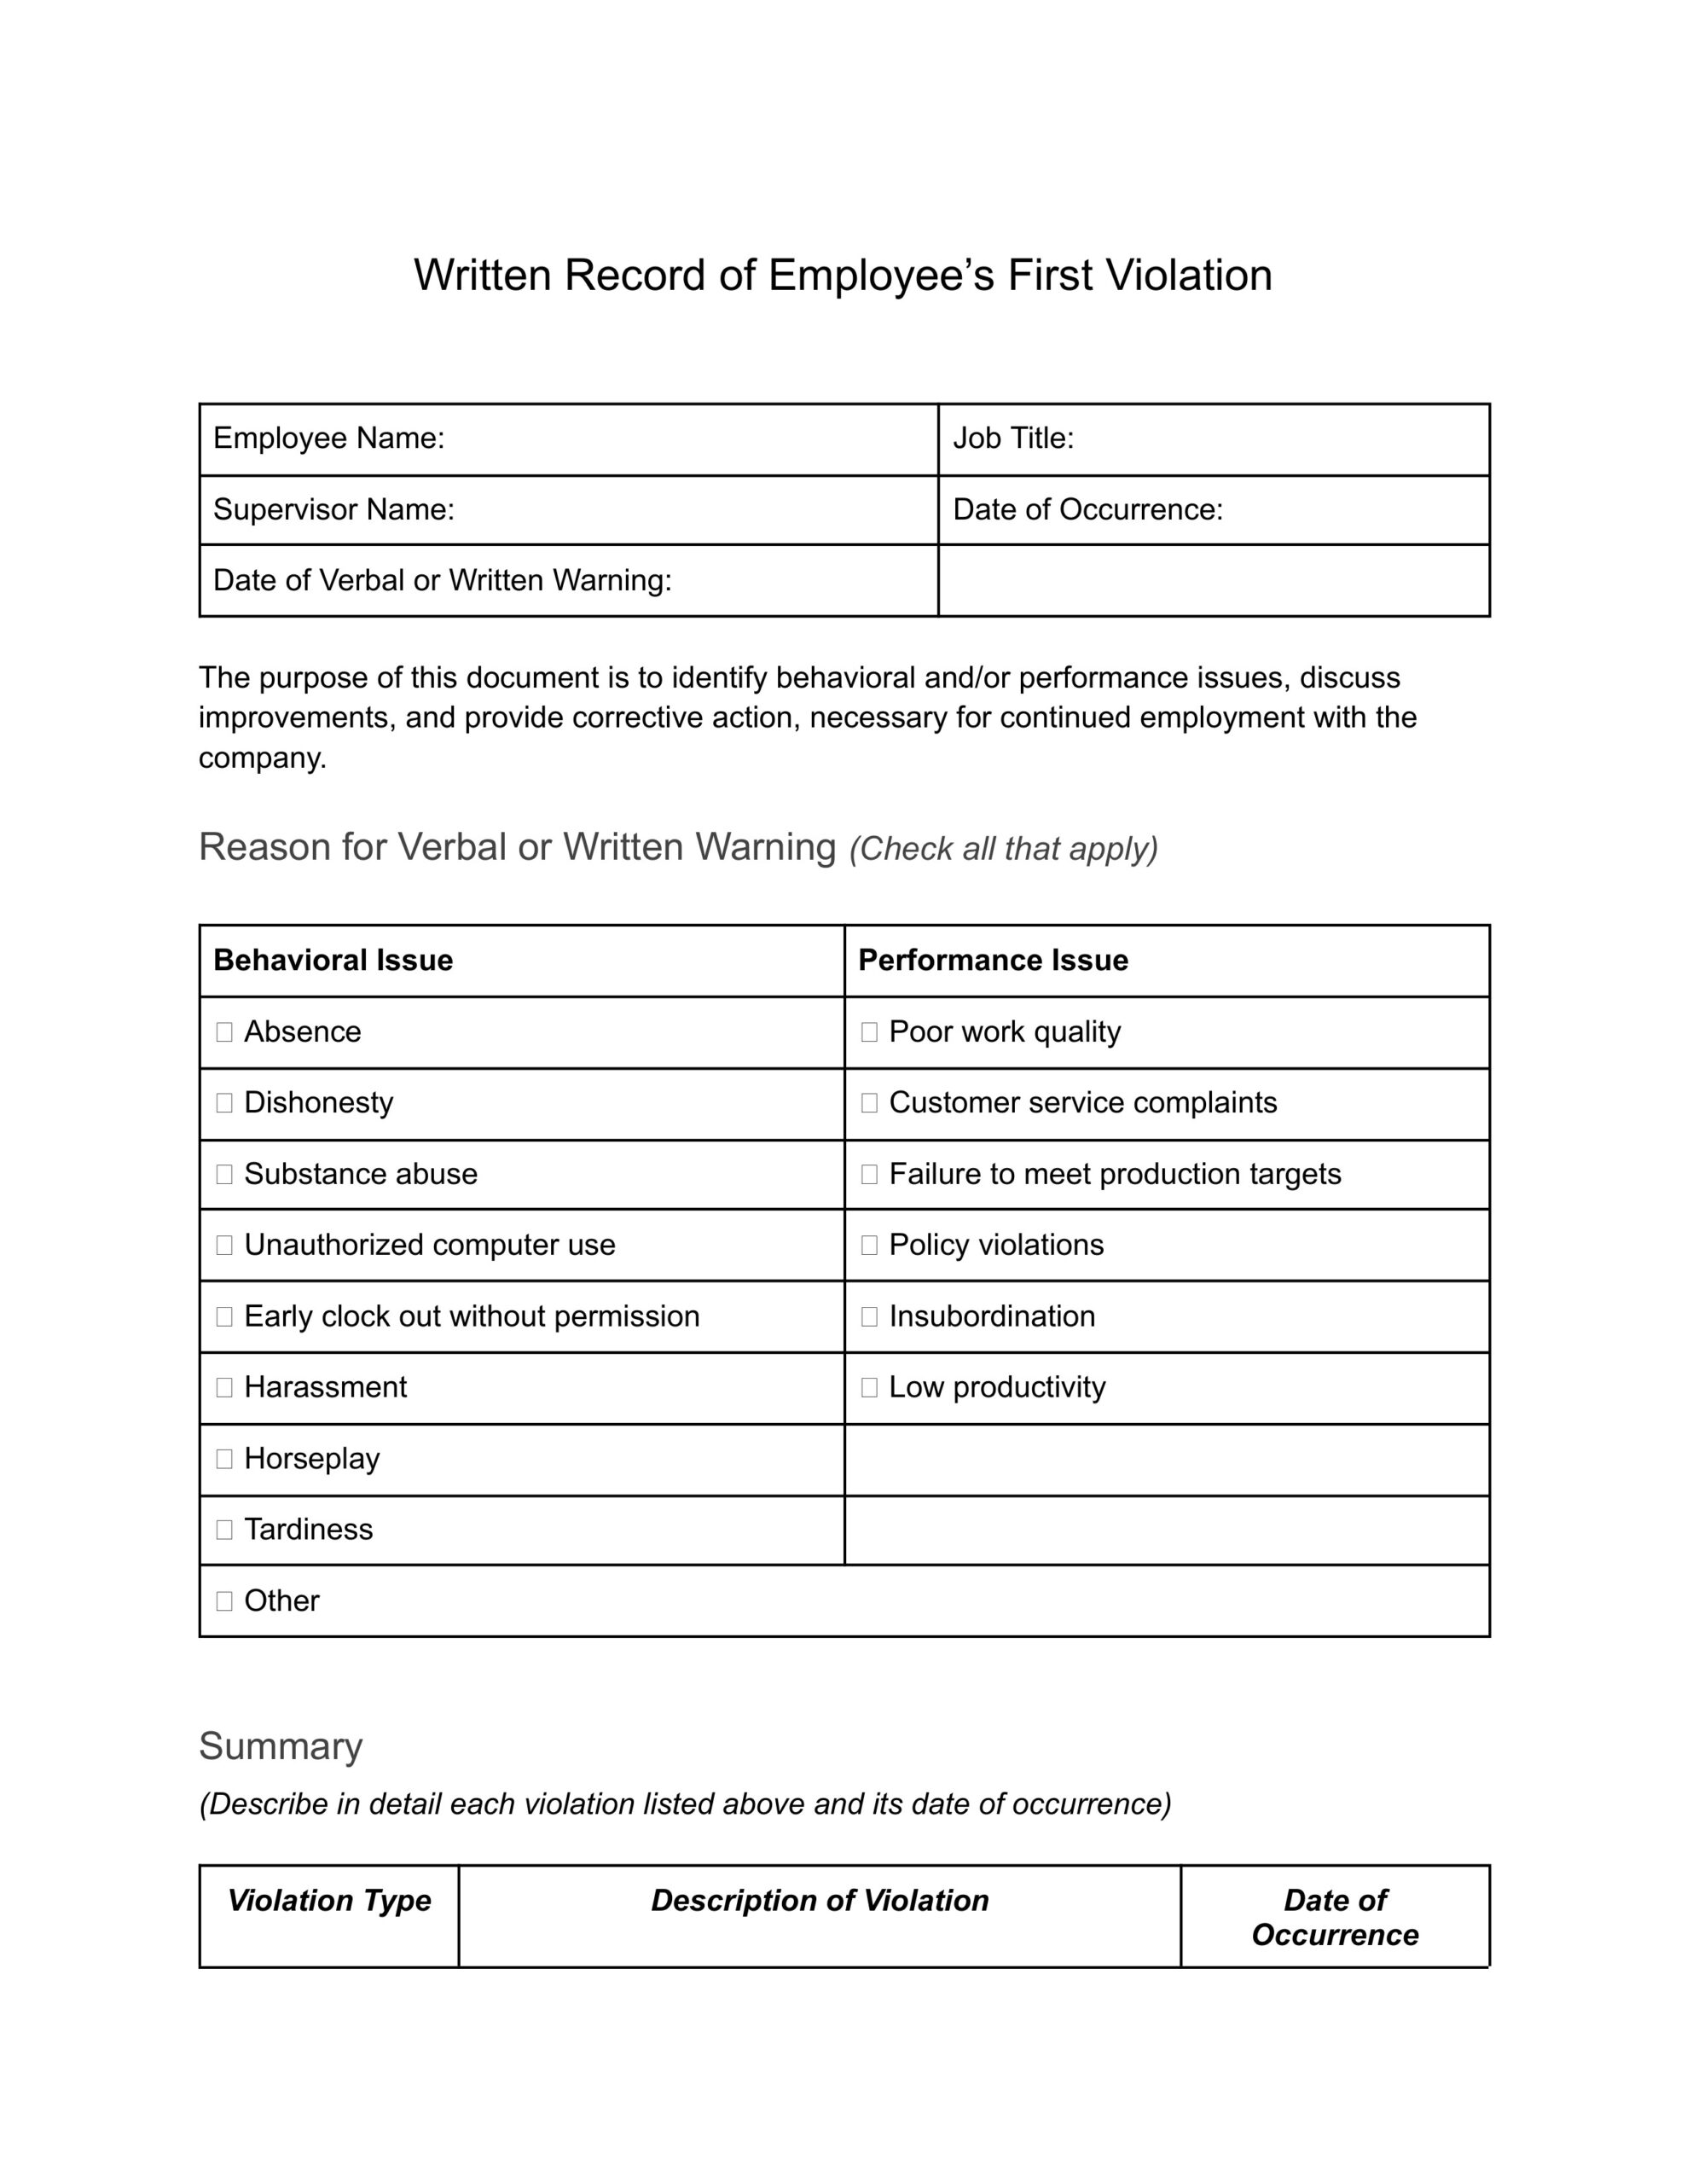 First Workplace Violation Write up form